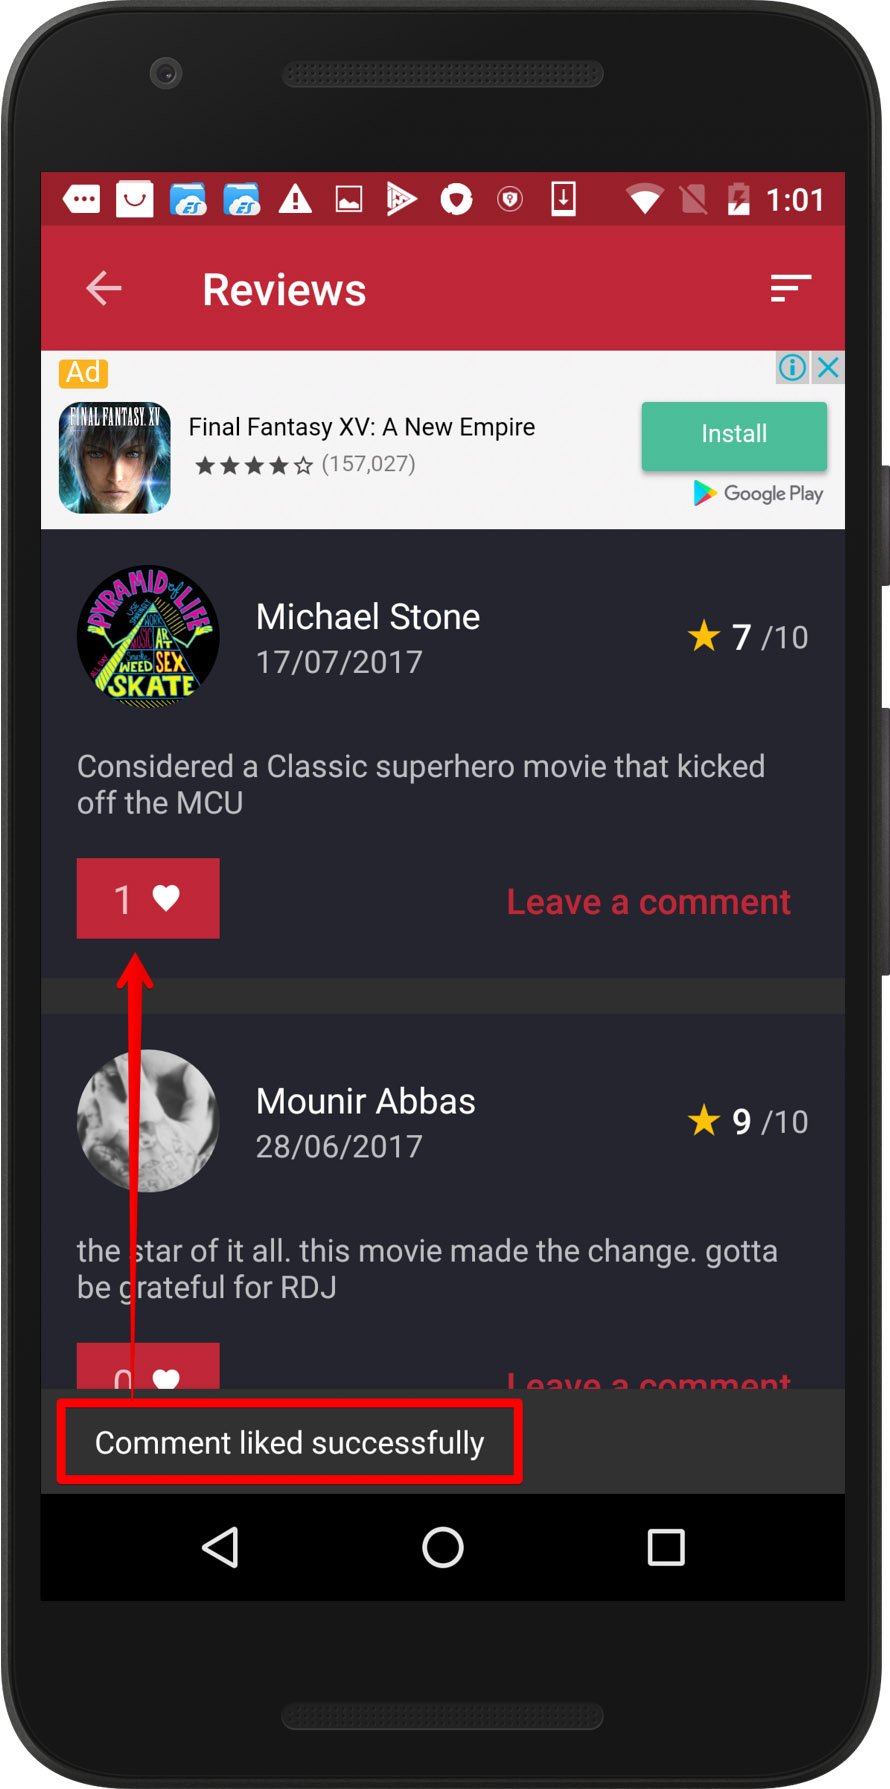 CineTrak app - review can be liked twice, screen 2 / Weekly bug crawl by QAwerk